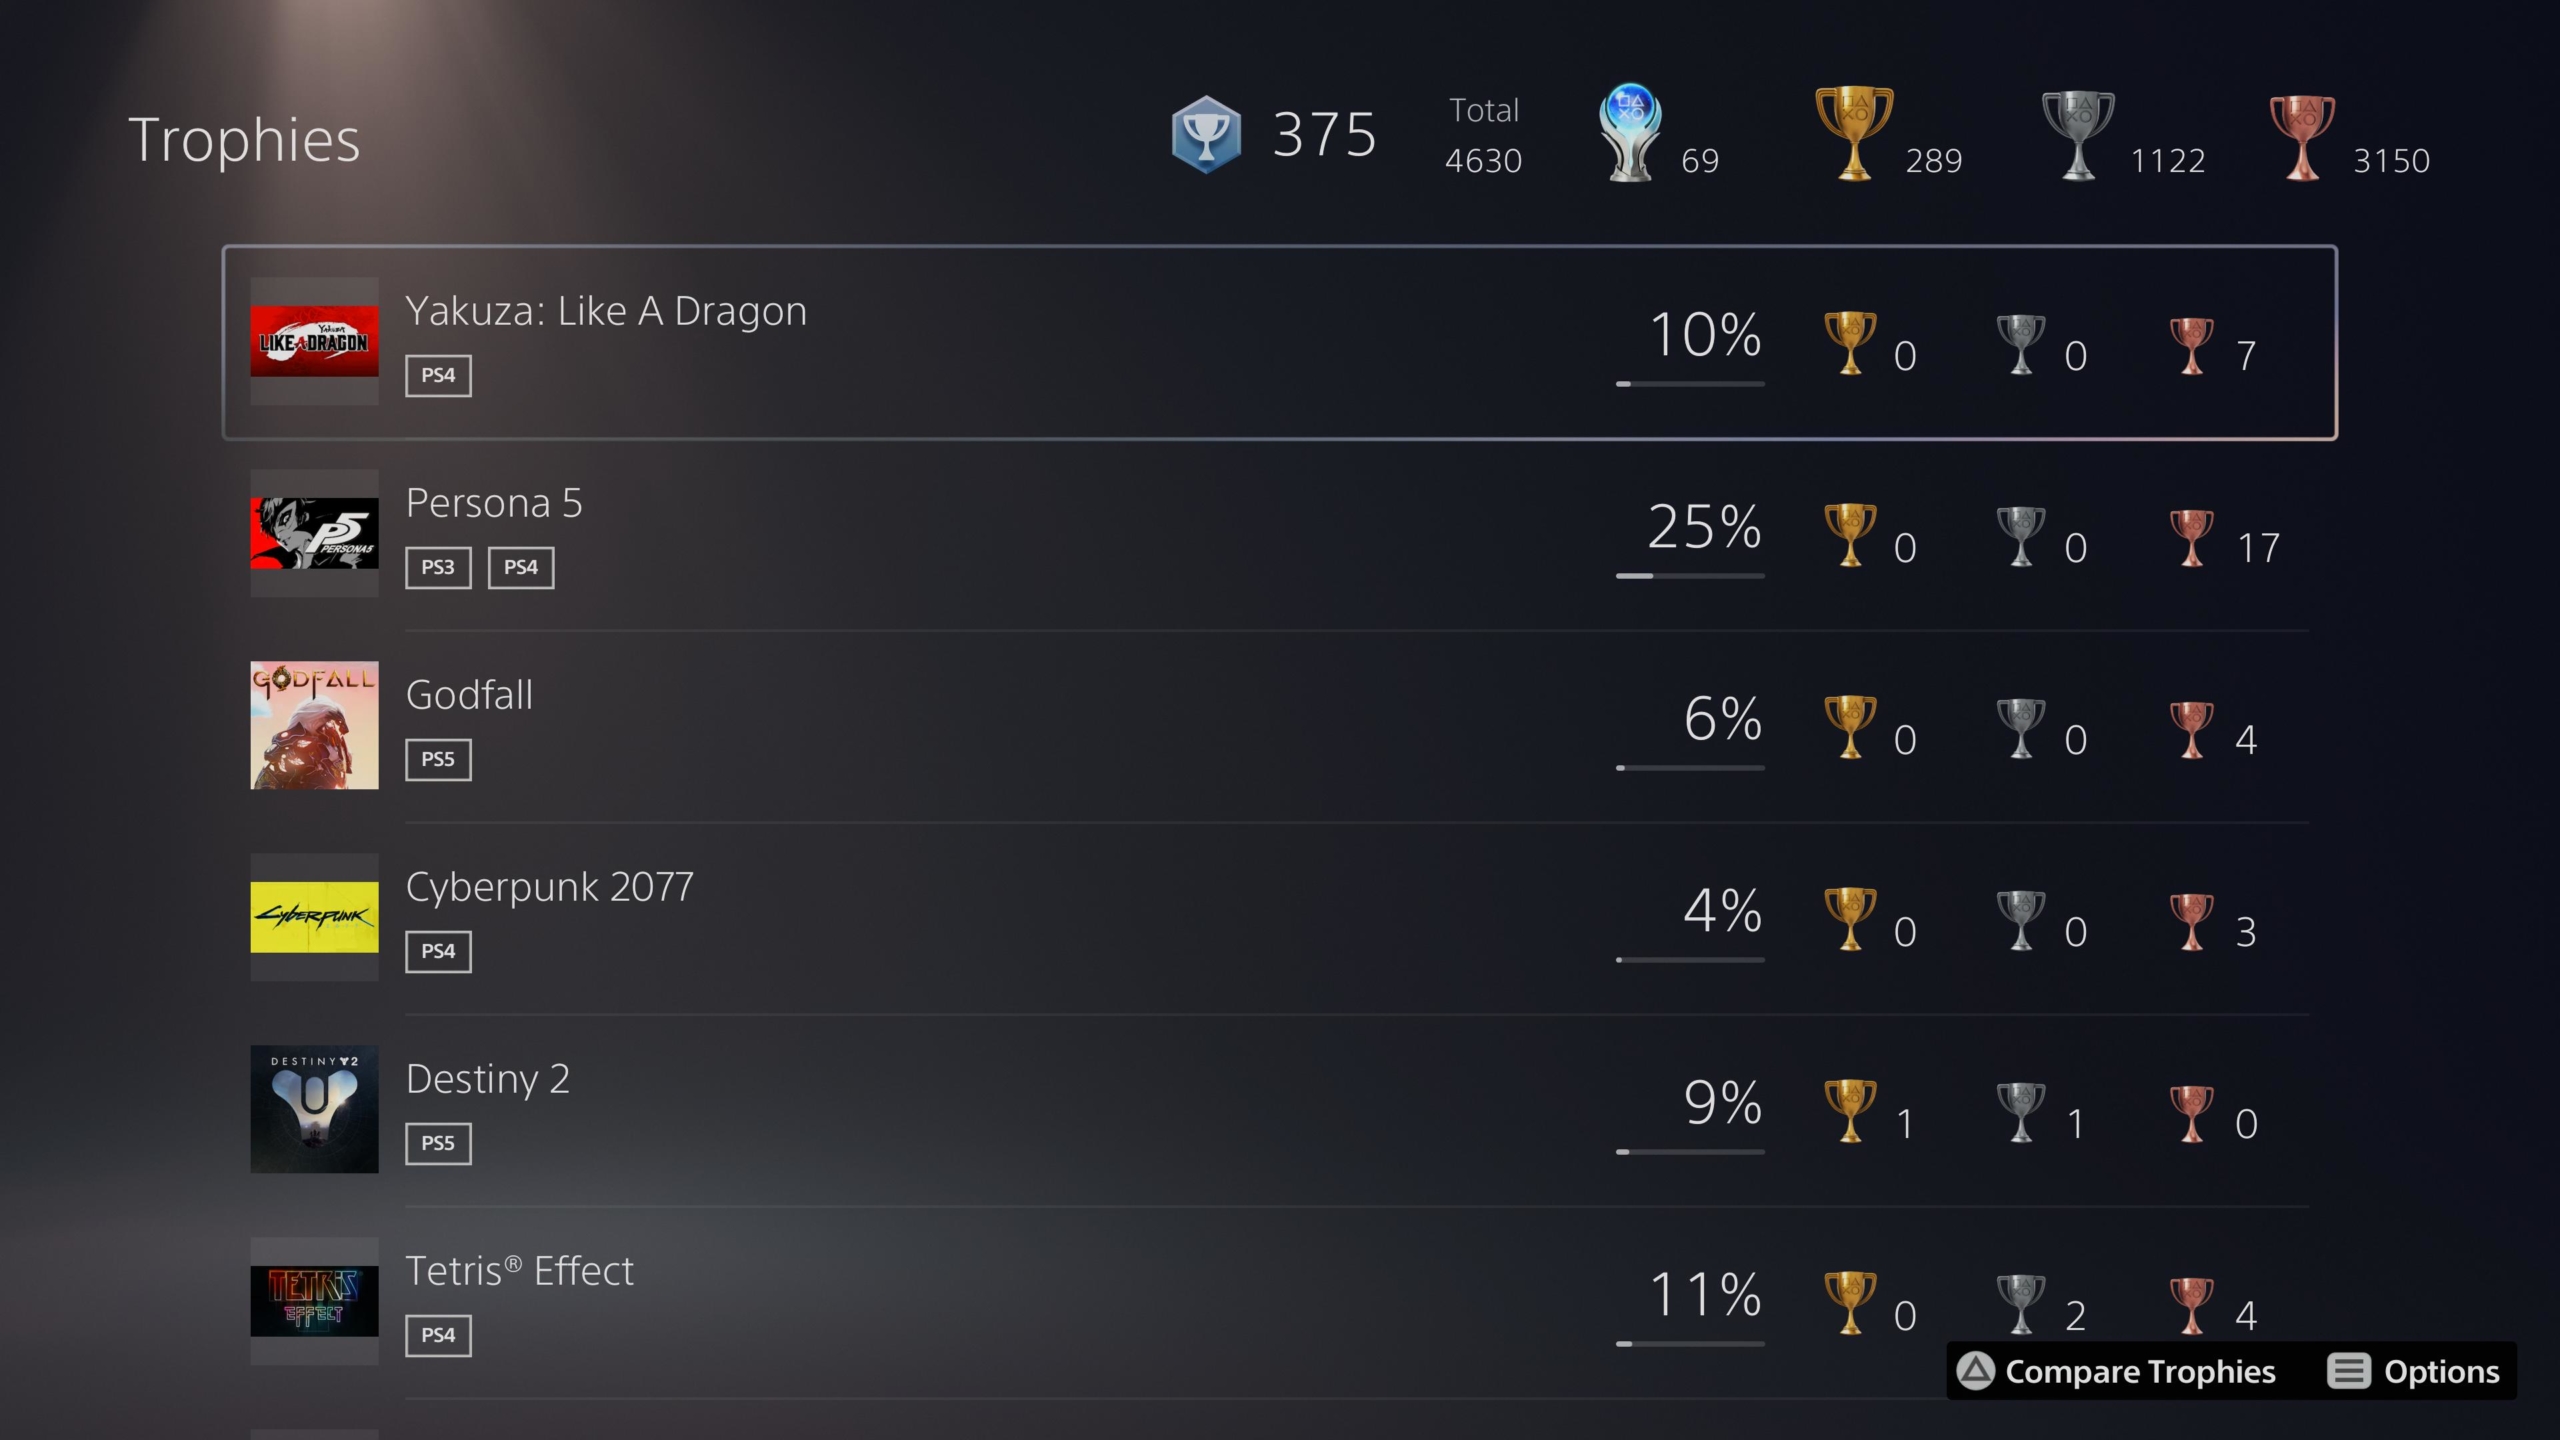 PlayStation Trophy enhancements coming with a new leveling